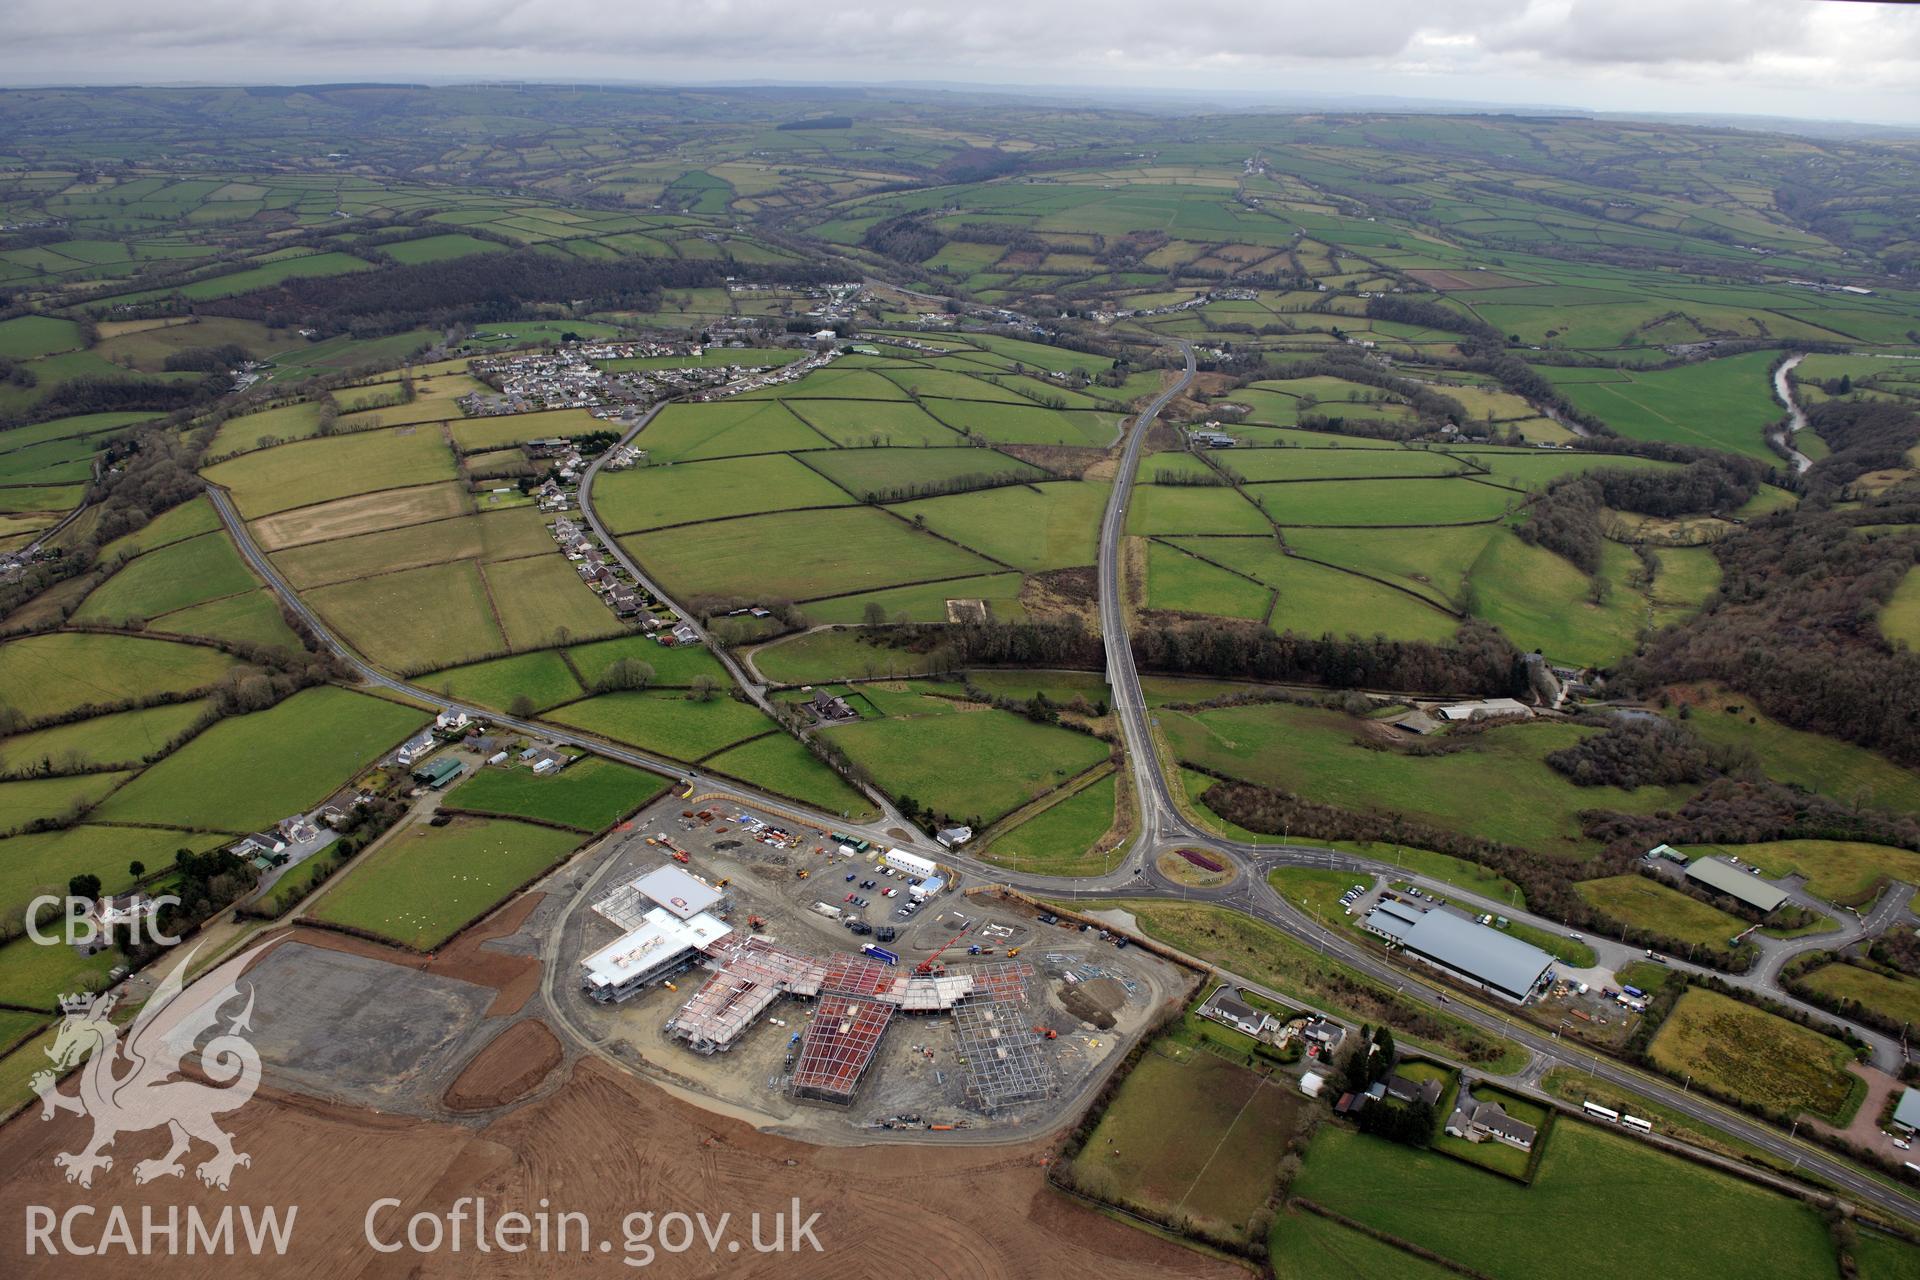 Ysgol Bro Teifi under construction, the A486 Llandysul bypass, and the town of Llandysul beyond. Oblique aerial photograph taken during the Royal Commission's programme of archaeological aerial reconnaissance by Toby Driver on 13th March 2015.